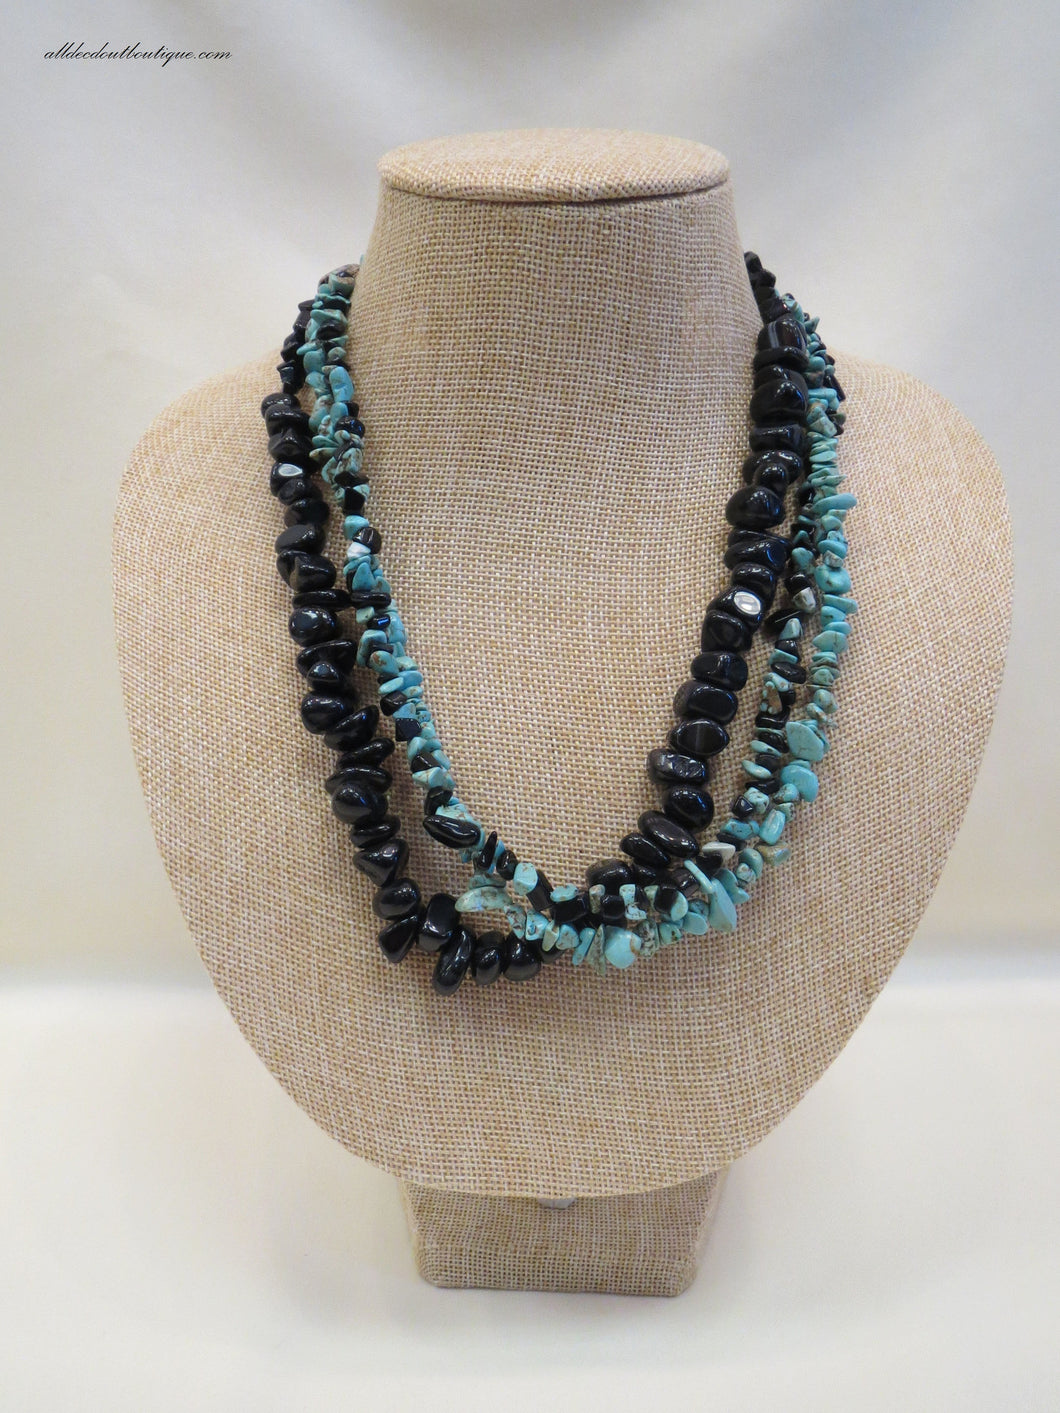 ADO | Black & Turquoise Bead Necklace - All Decd Out